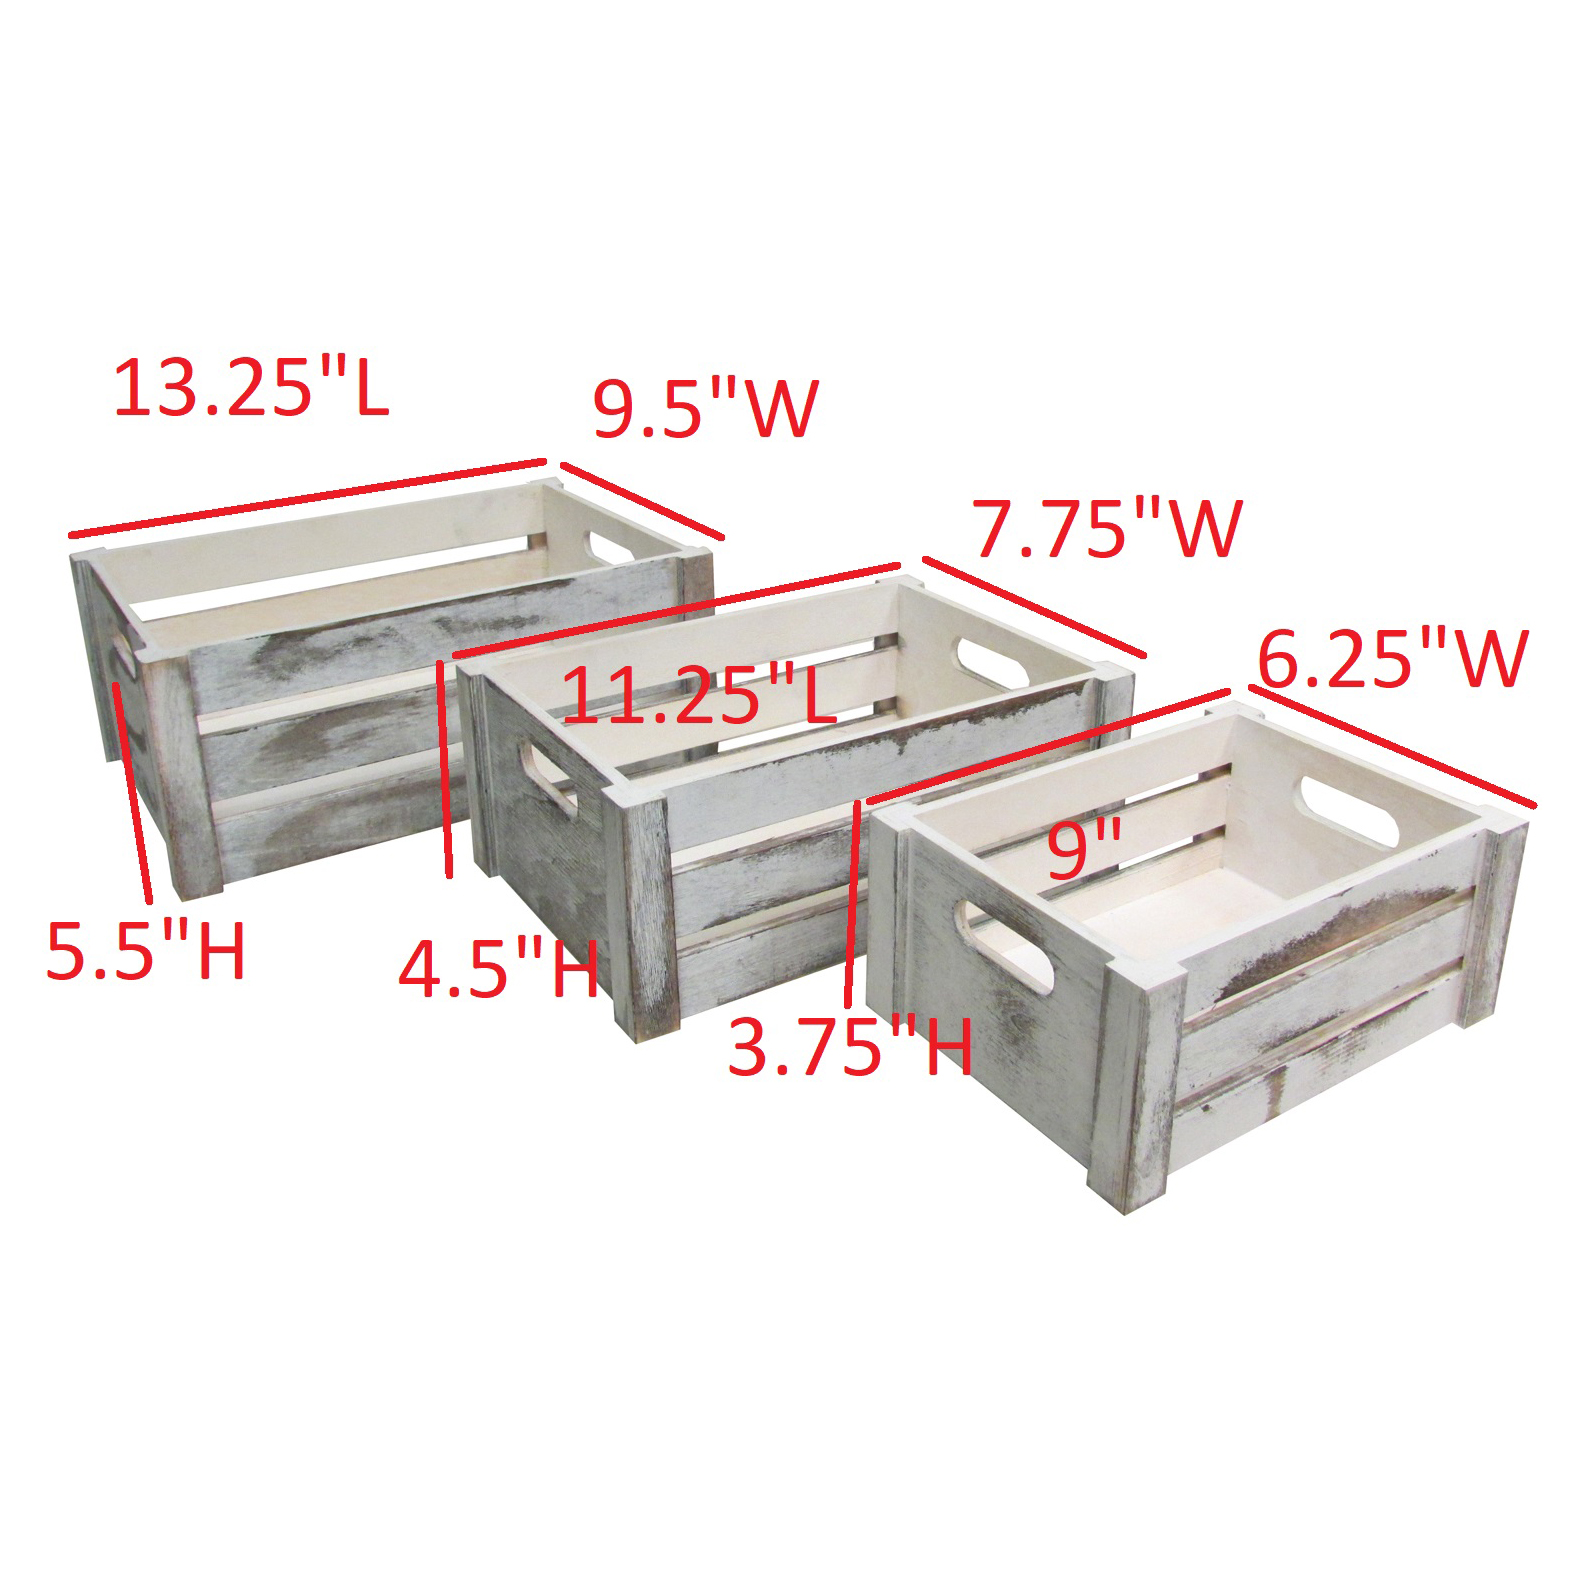 Admired by Nature 0.119 Gallon Wood Storage Crates, Rustic White, 3 Count - image 3 of 6